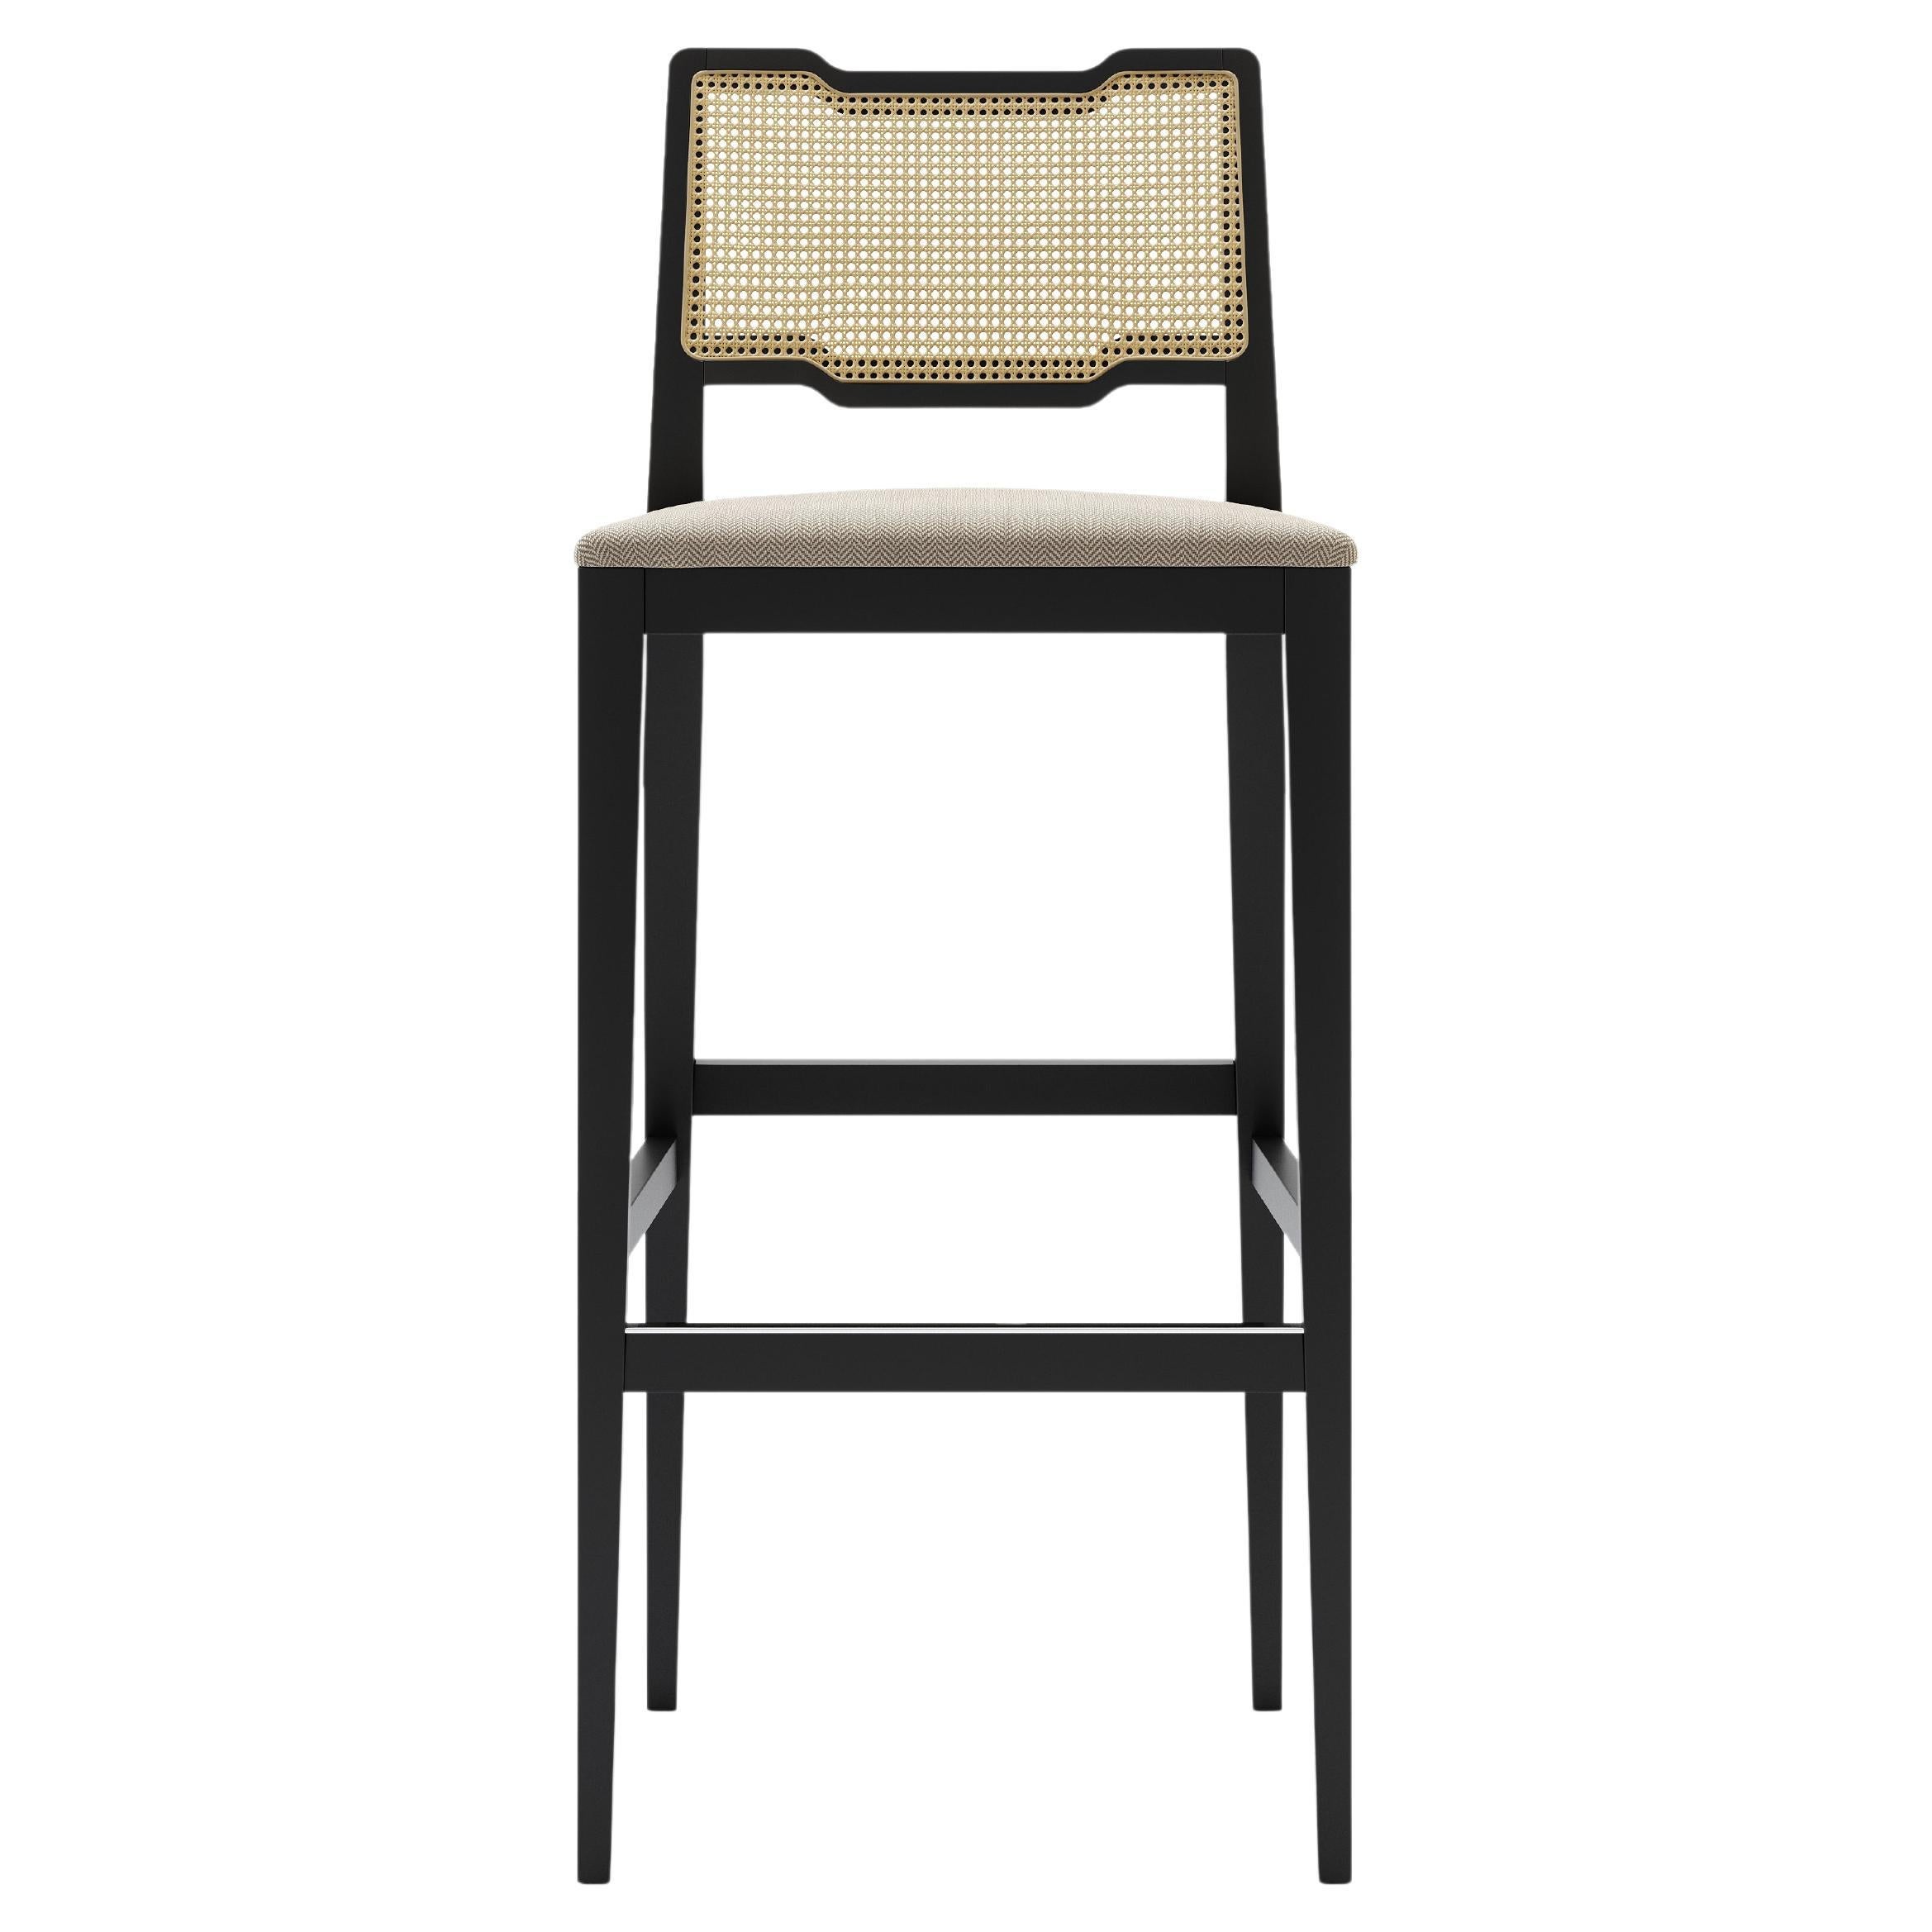 Made to last, the solid wood structure of this barstool combines the perfect mix of a contemporary design with vintage vibe. The detailed woven-work technique on the back promises to make a statement in any room as distinguished as it is. The